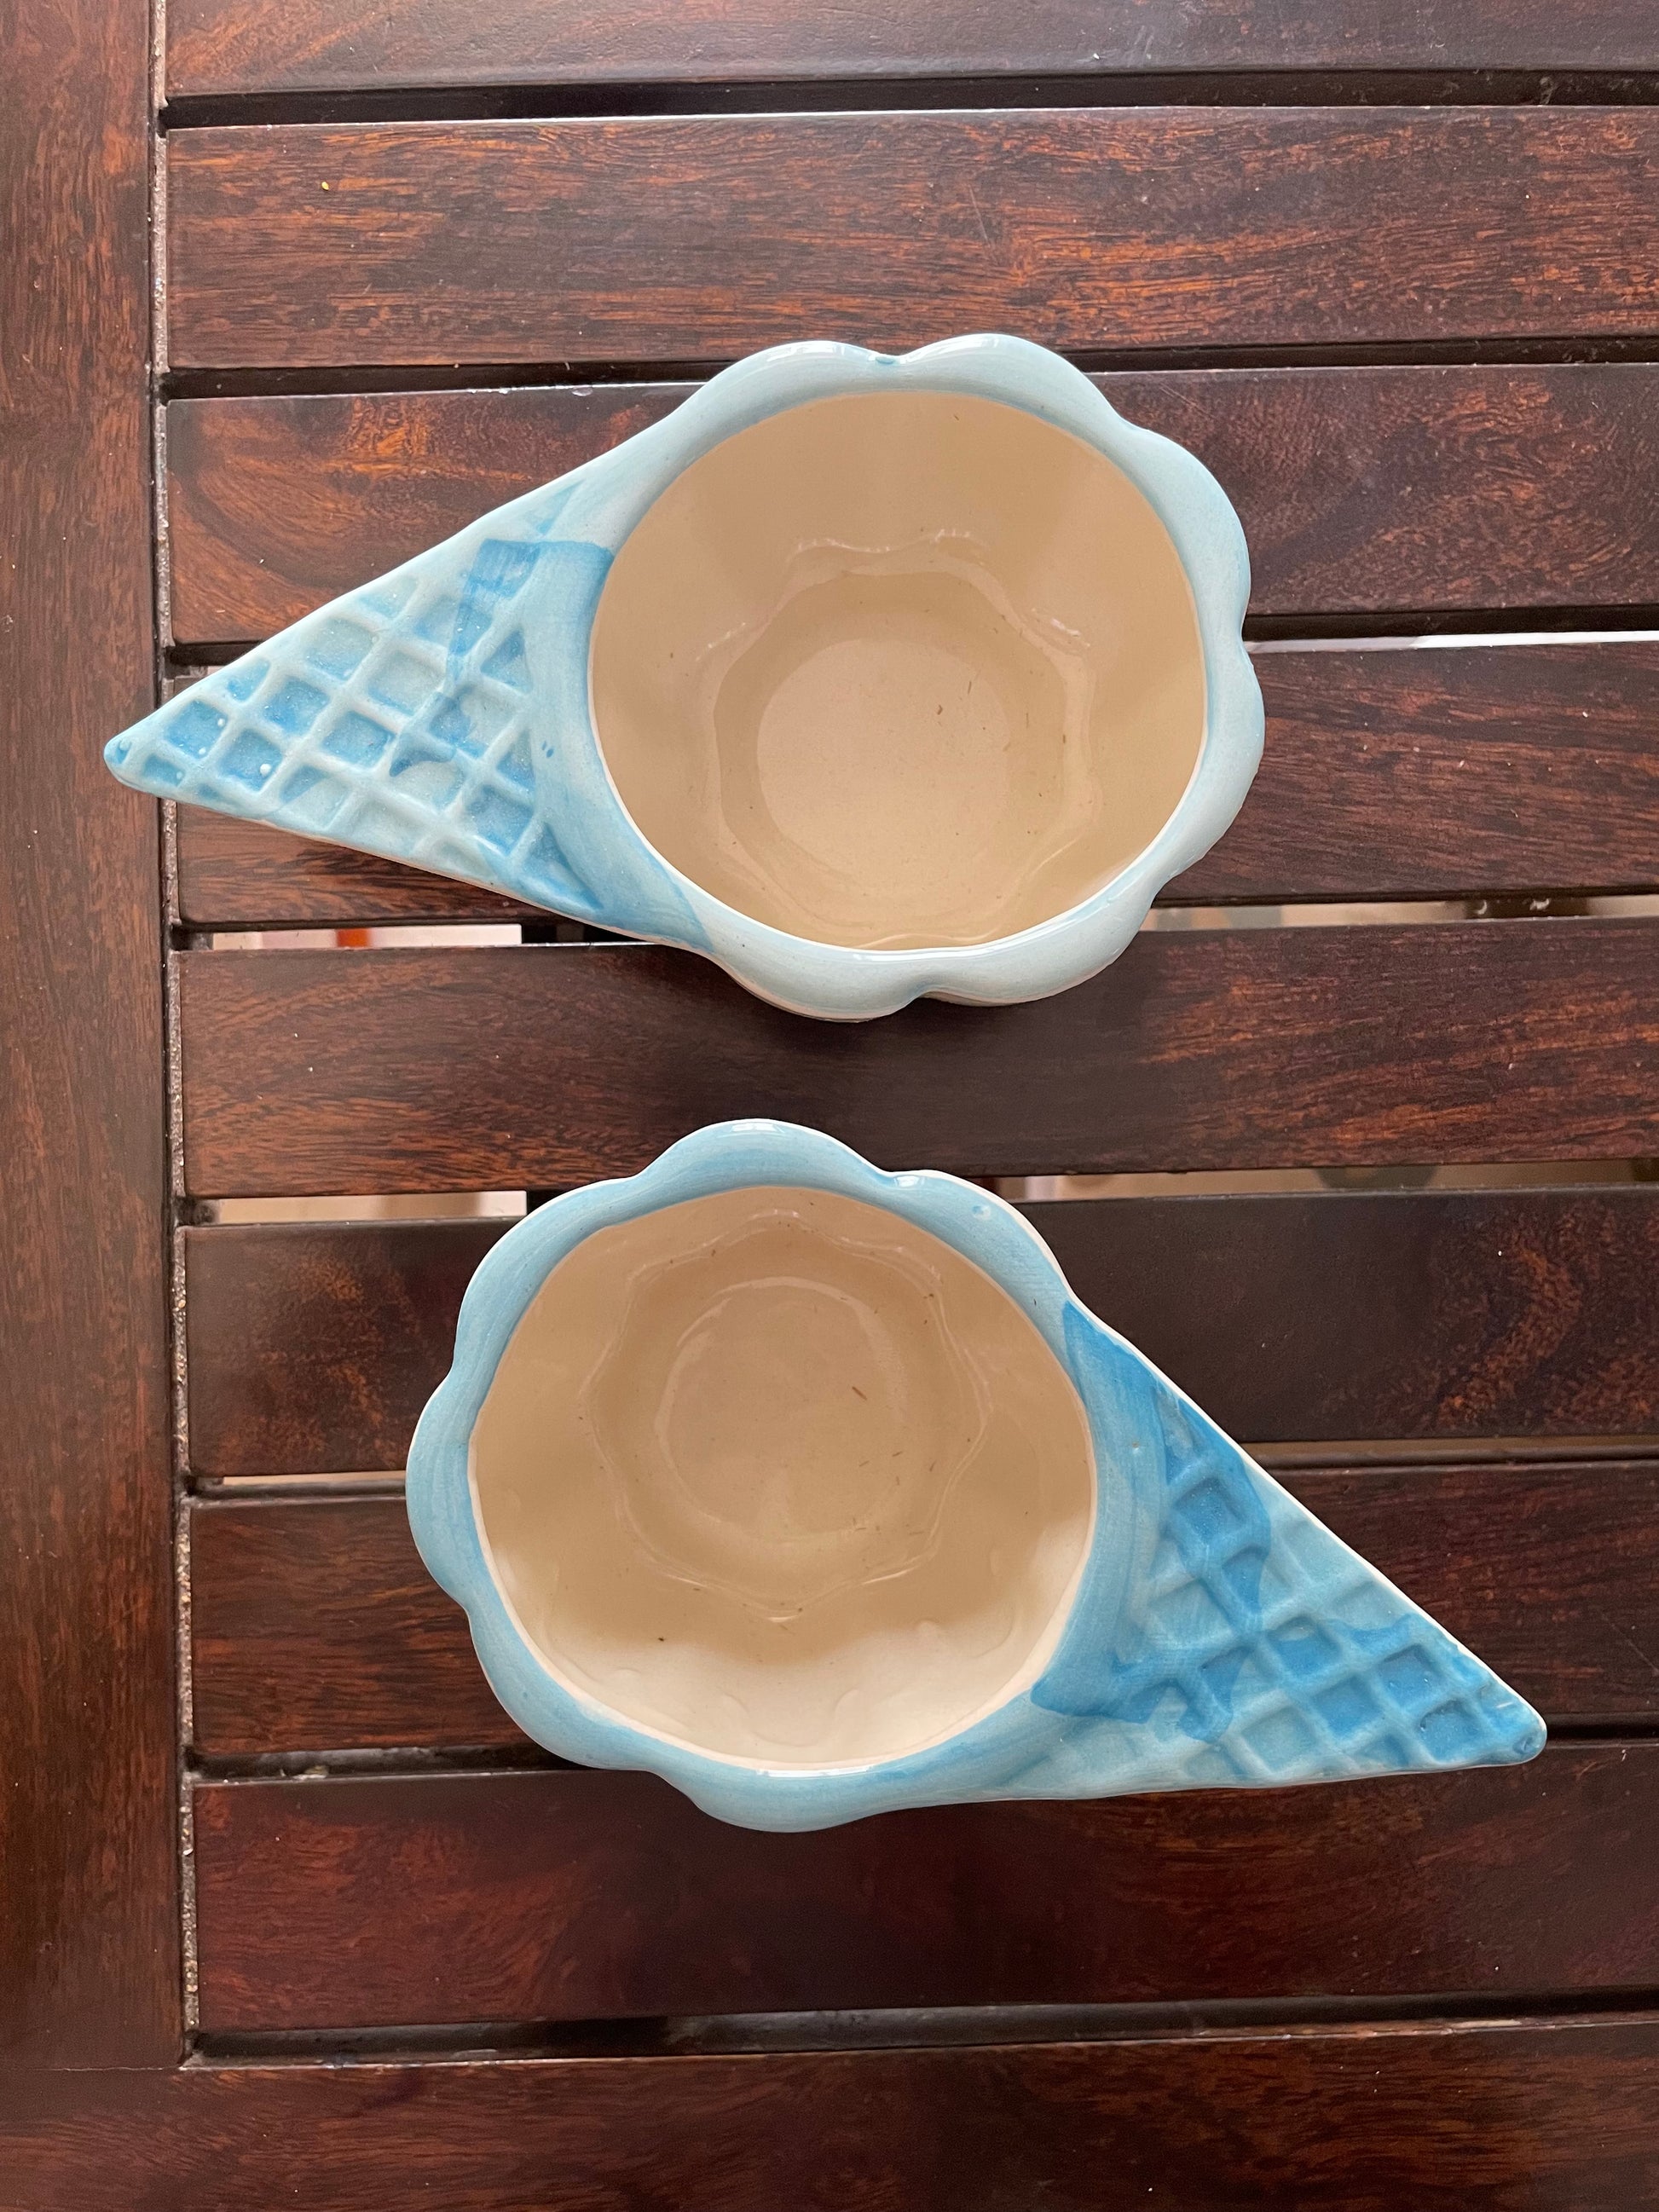 Set of 2 light blue ceramic ice cream cone-shaped bowls on wooden table. Waffle cone handle, scallop rim. Explore unique gifting ideas in Bangalore.